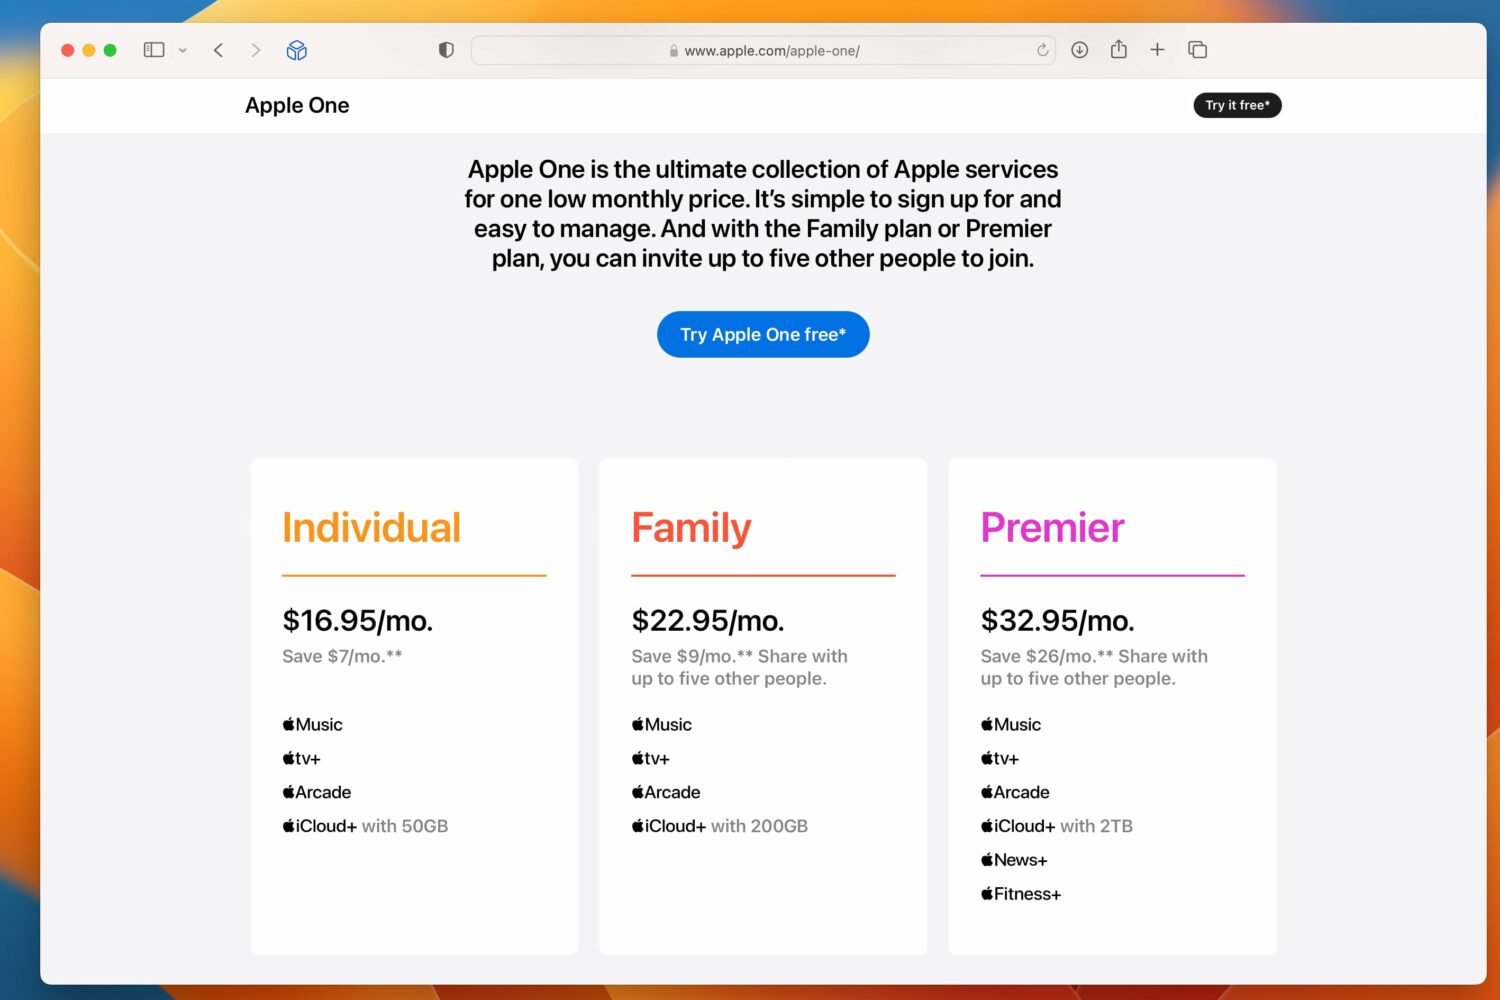 Safari screenshot showcasing the new price structure for the Apple One bundle tiers